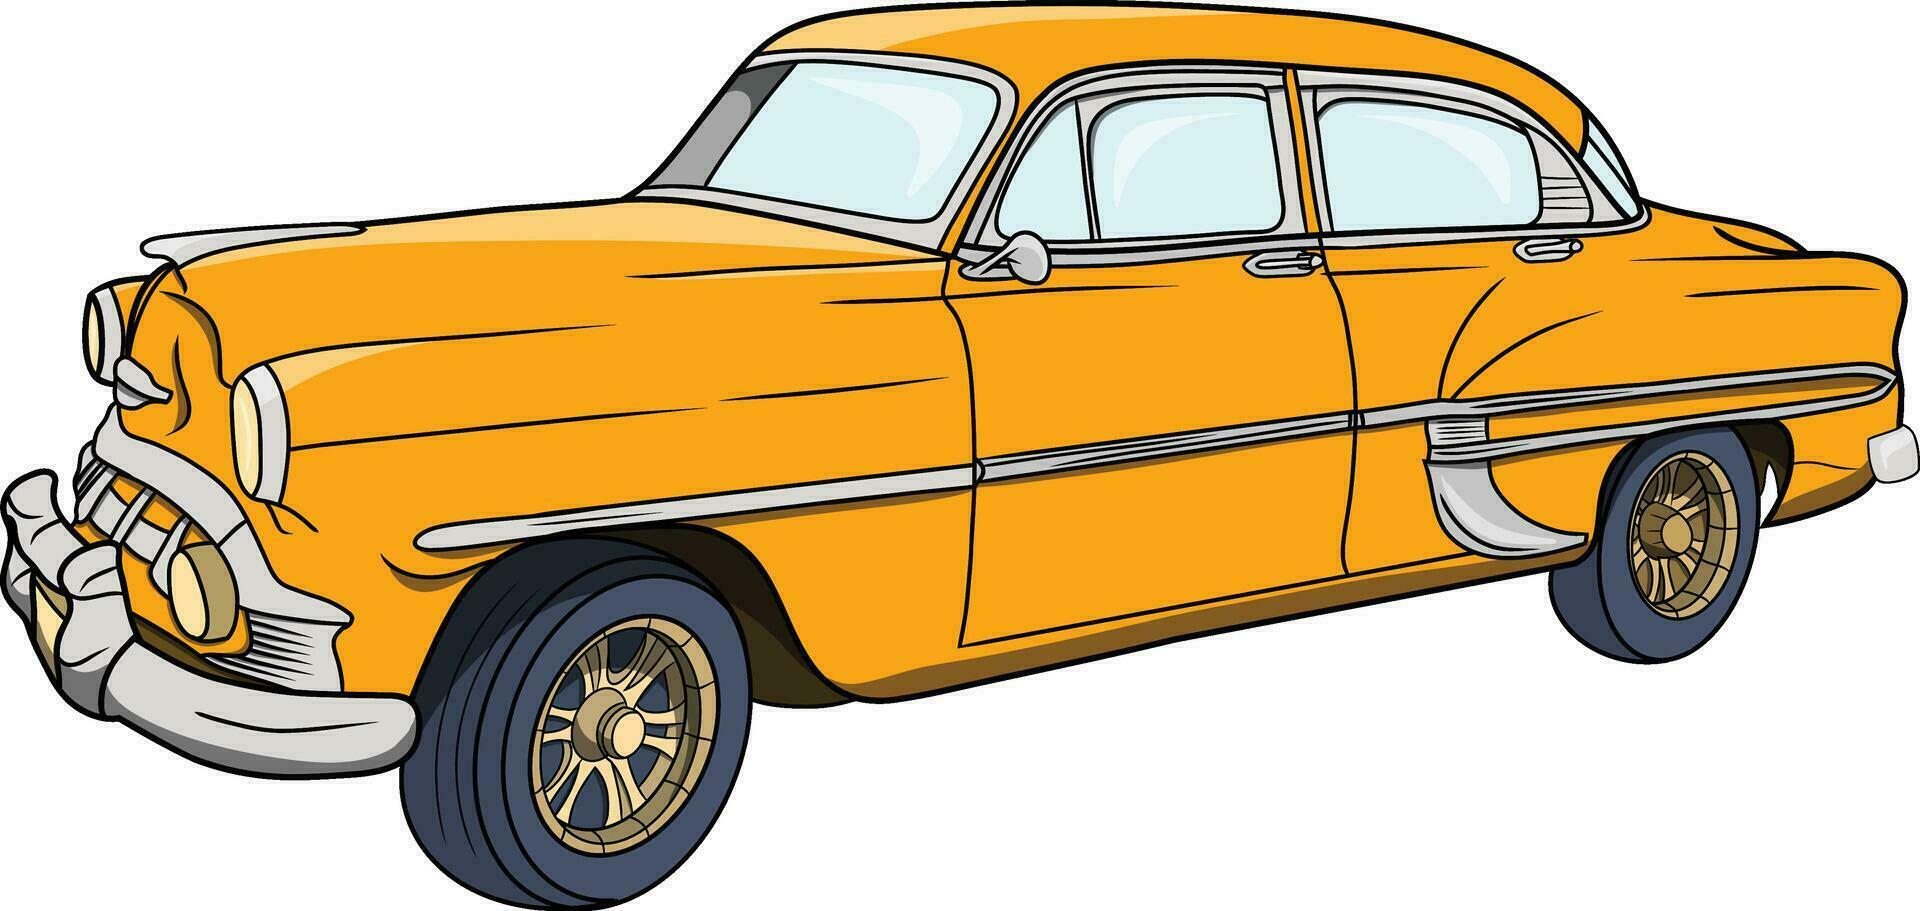 Very Simple Hand drawn Retro Yellow Car Isolated For Coloring Books vector